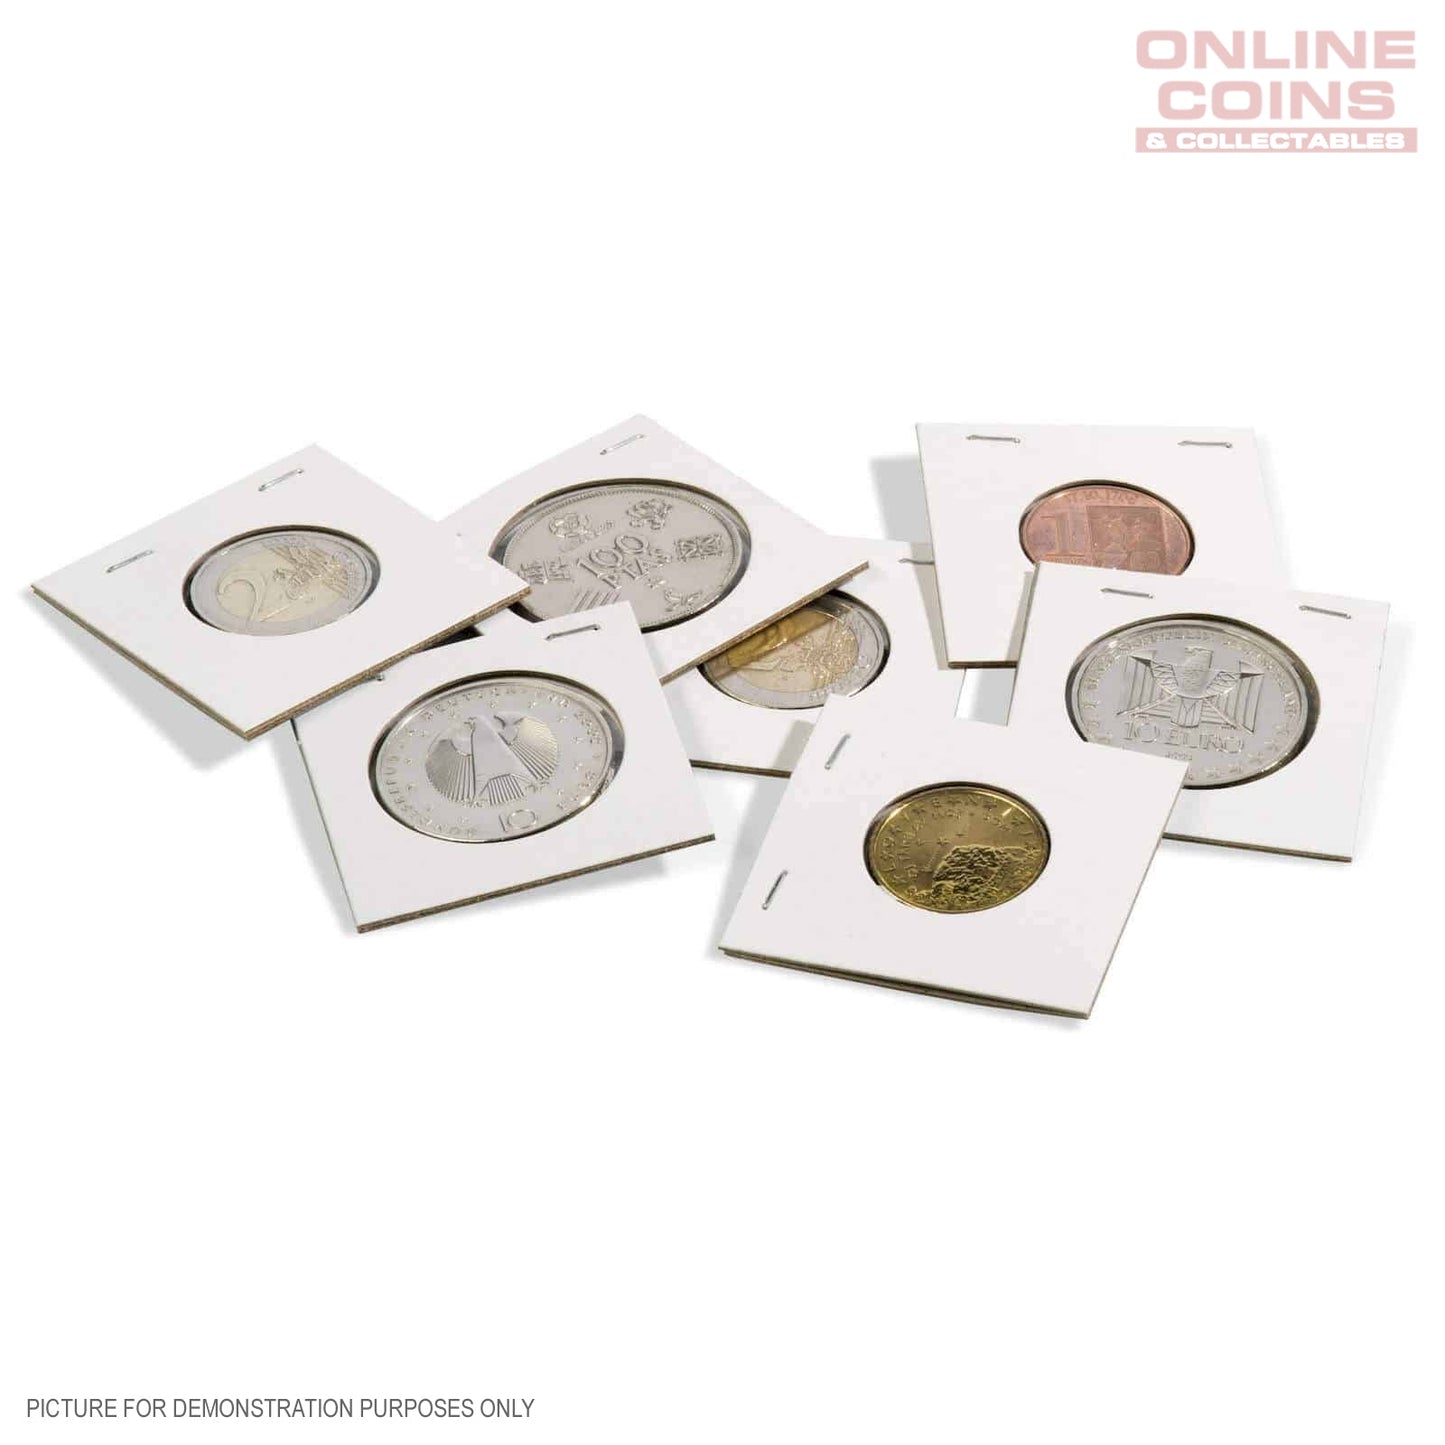 Lighthouse TACK WHITE 20mm Staple 2"x2" Coin Holders (Suitable For Australian 1c, 5c, Sixpence And Half Sovereigns)